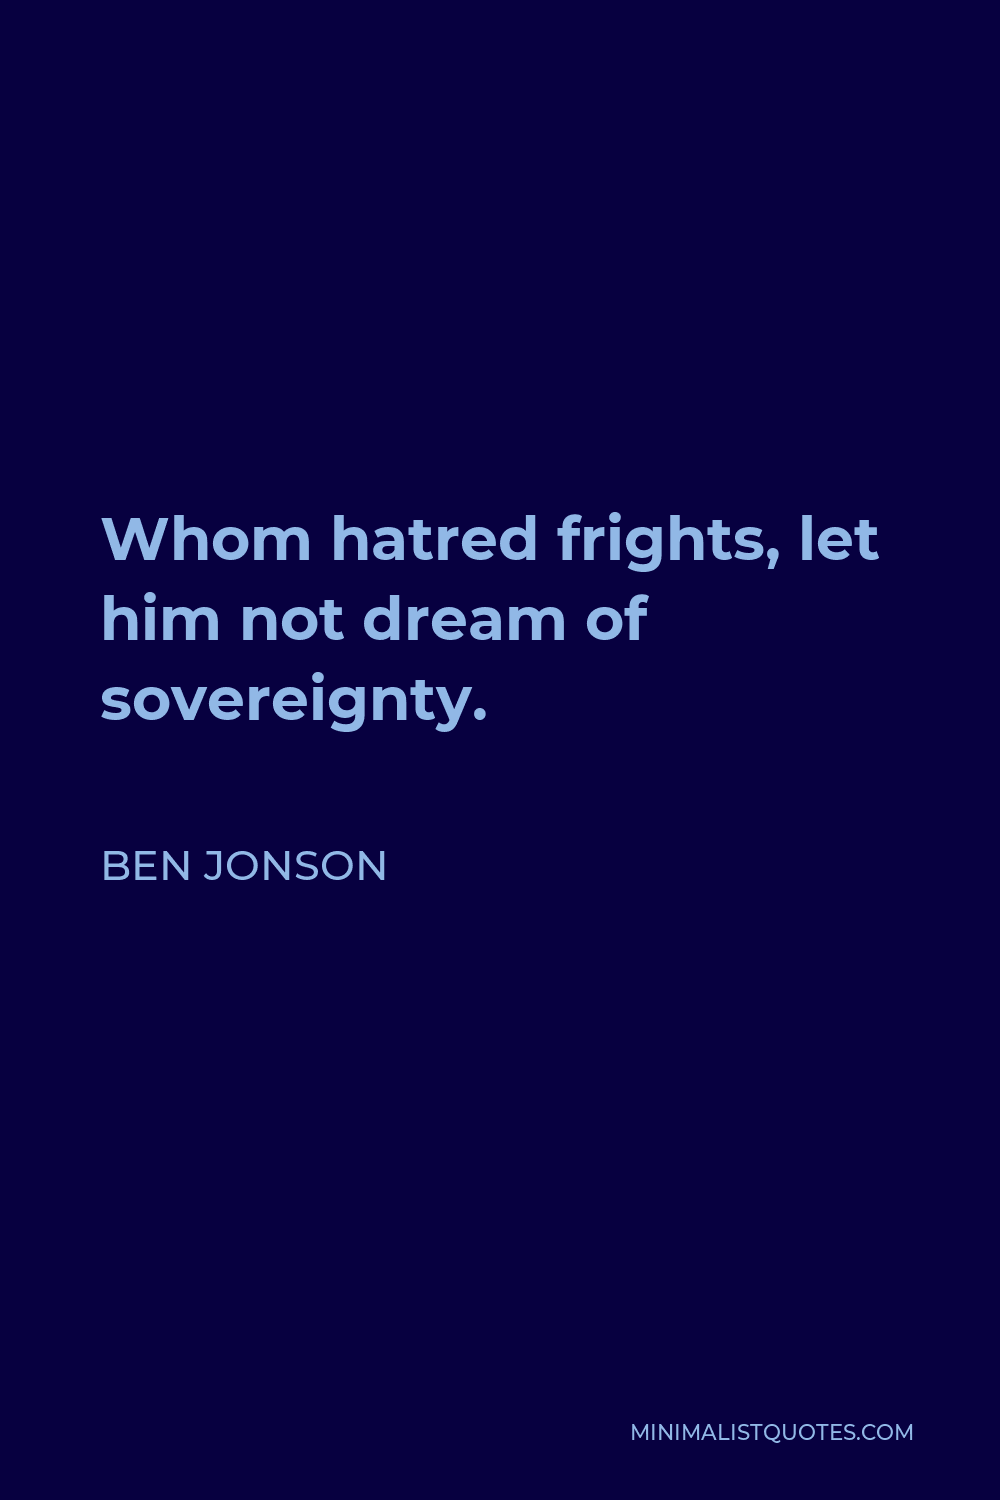 Ben Jonson Quote - Whom hatred frights, let him not dream of sovereignty.